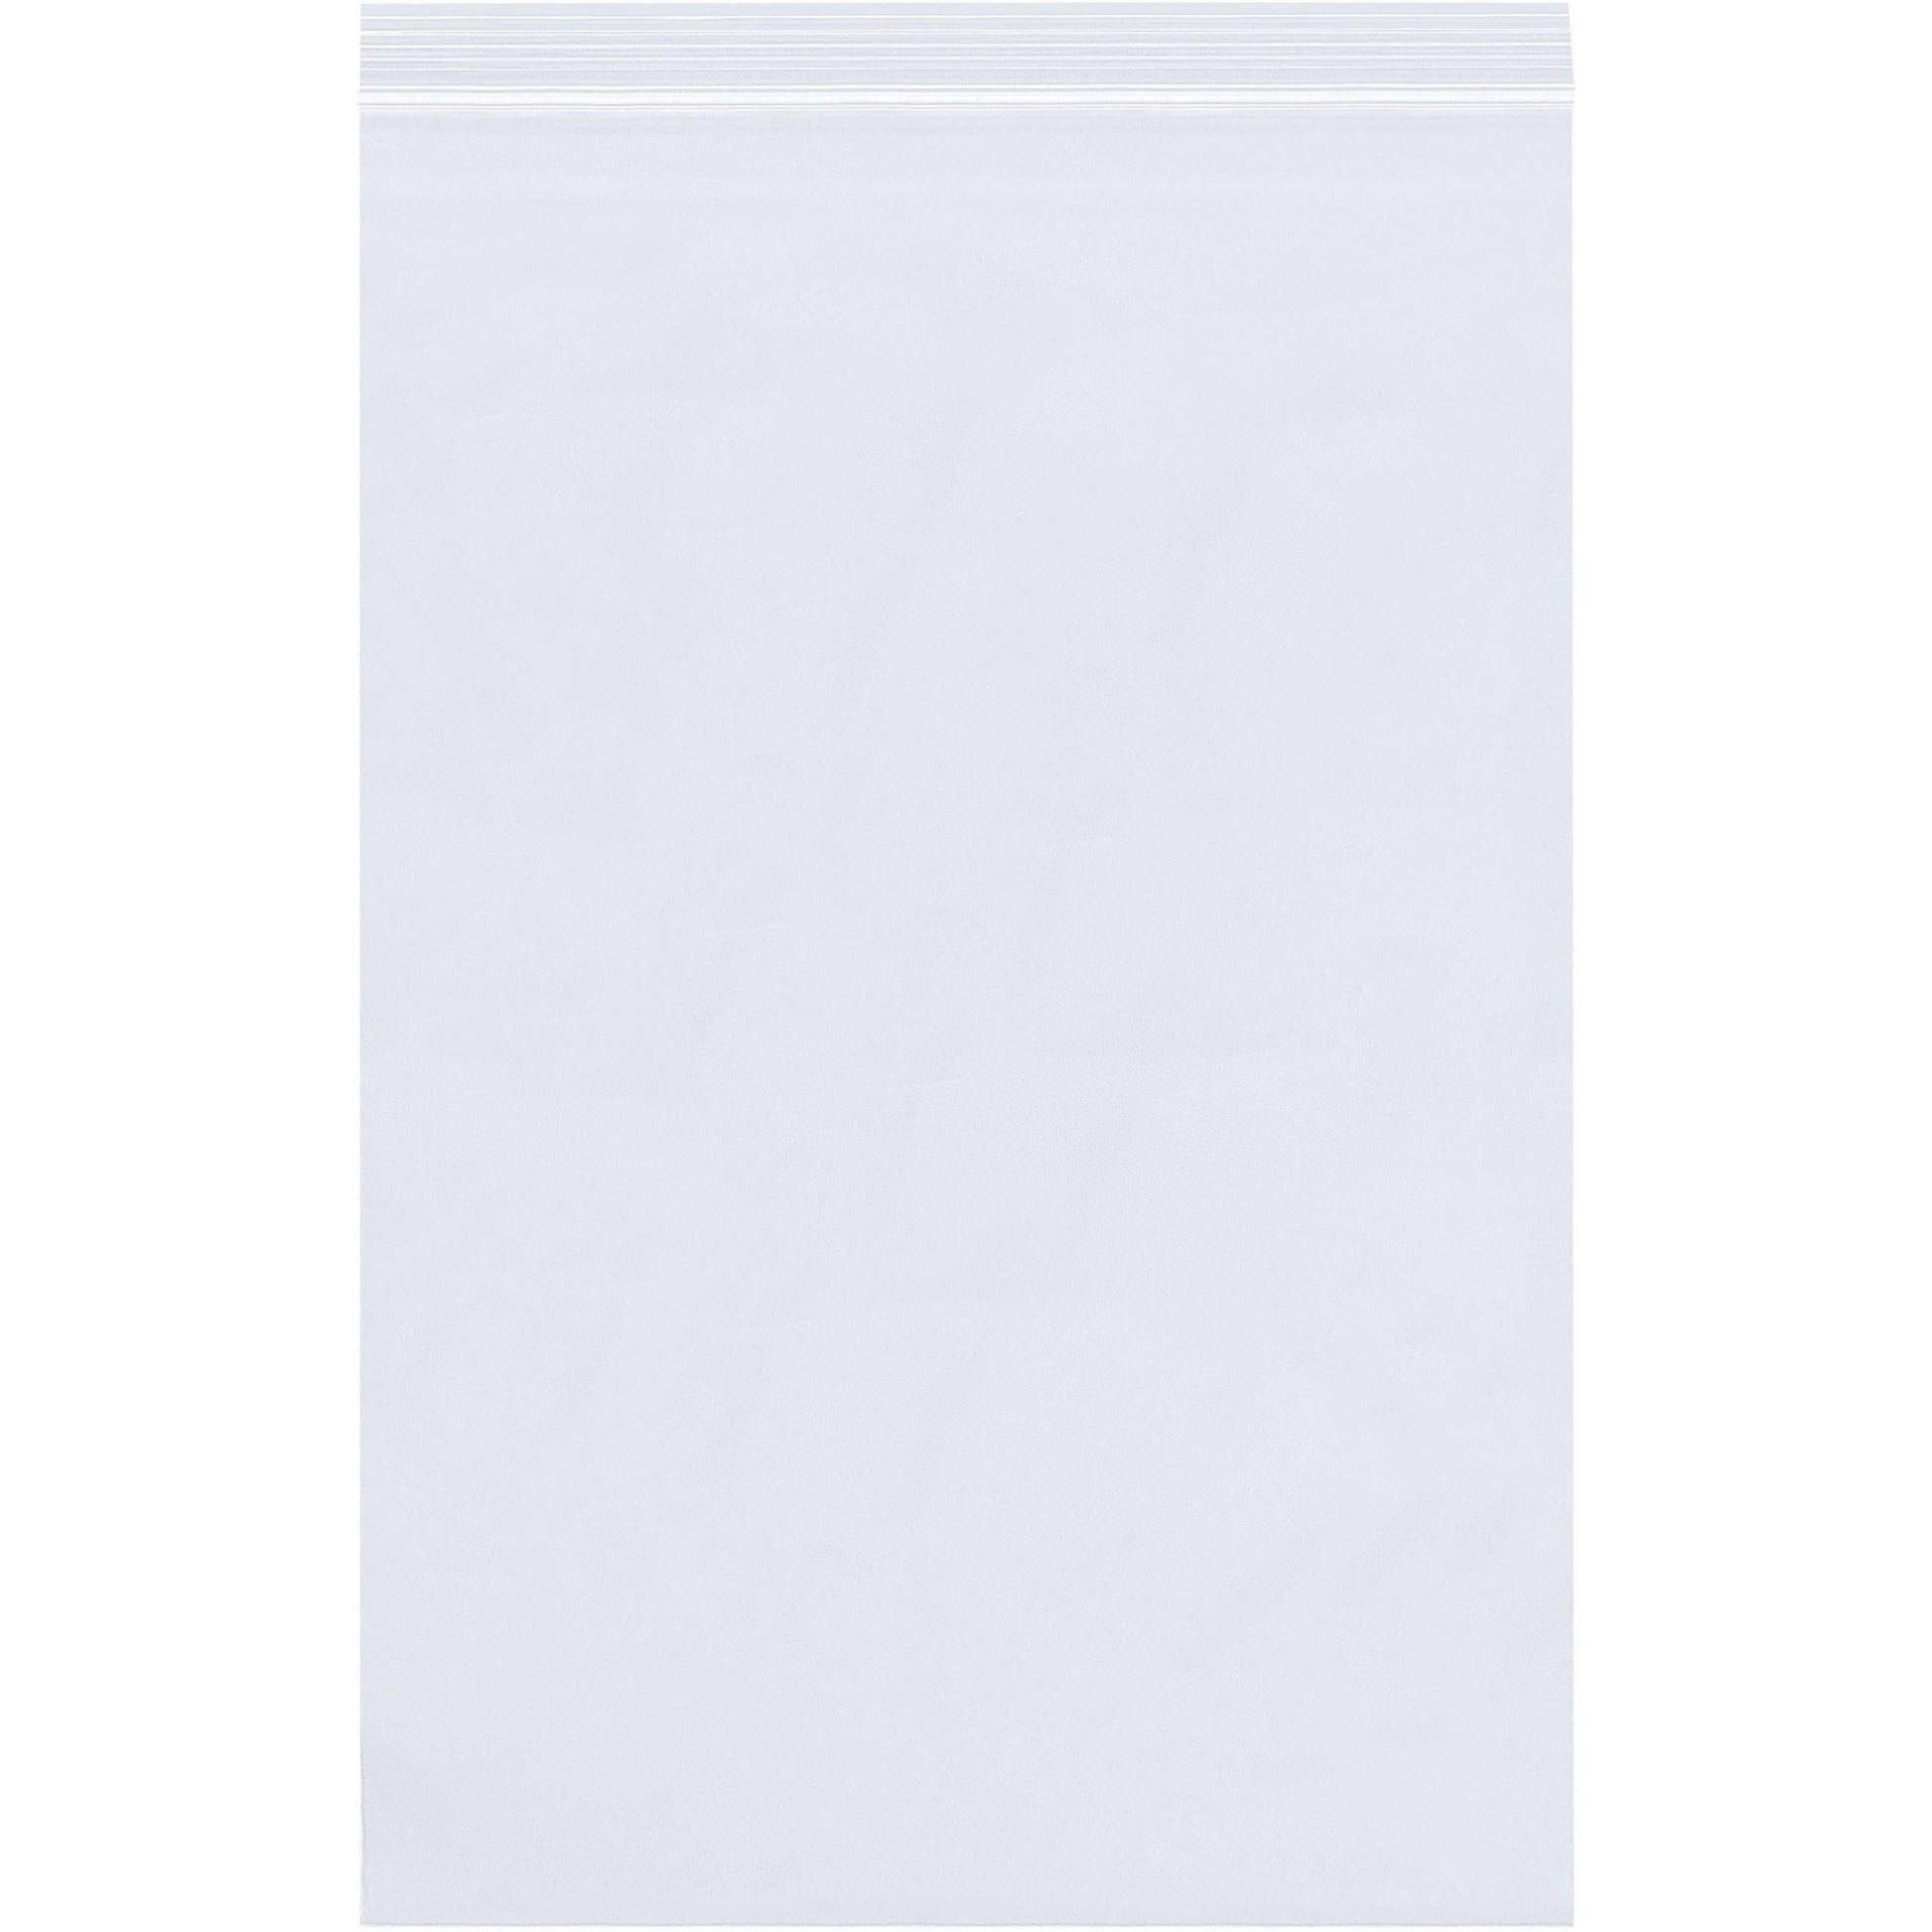 7 x 8" - 2 Mil Reclosable Poly Bags - PB3629